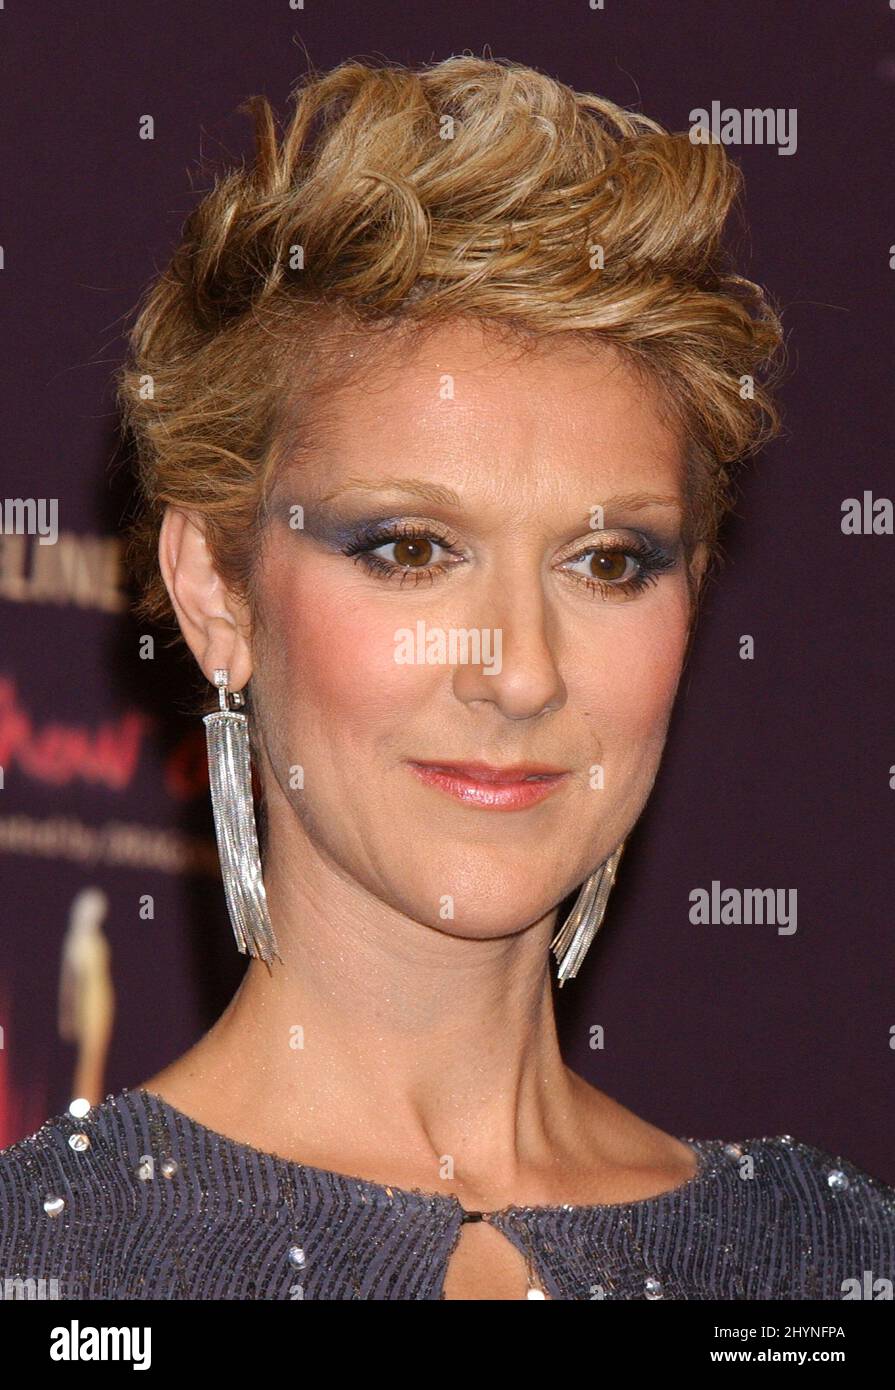 CELINE DION'S 'A NEW DAY' CONCERT OPENING AT THE COLISEUM IN LAS VEGAS PICTURE: UK PRESS Stock Photo